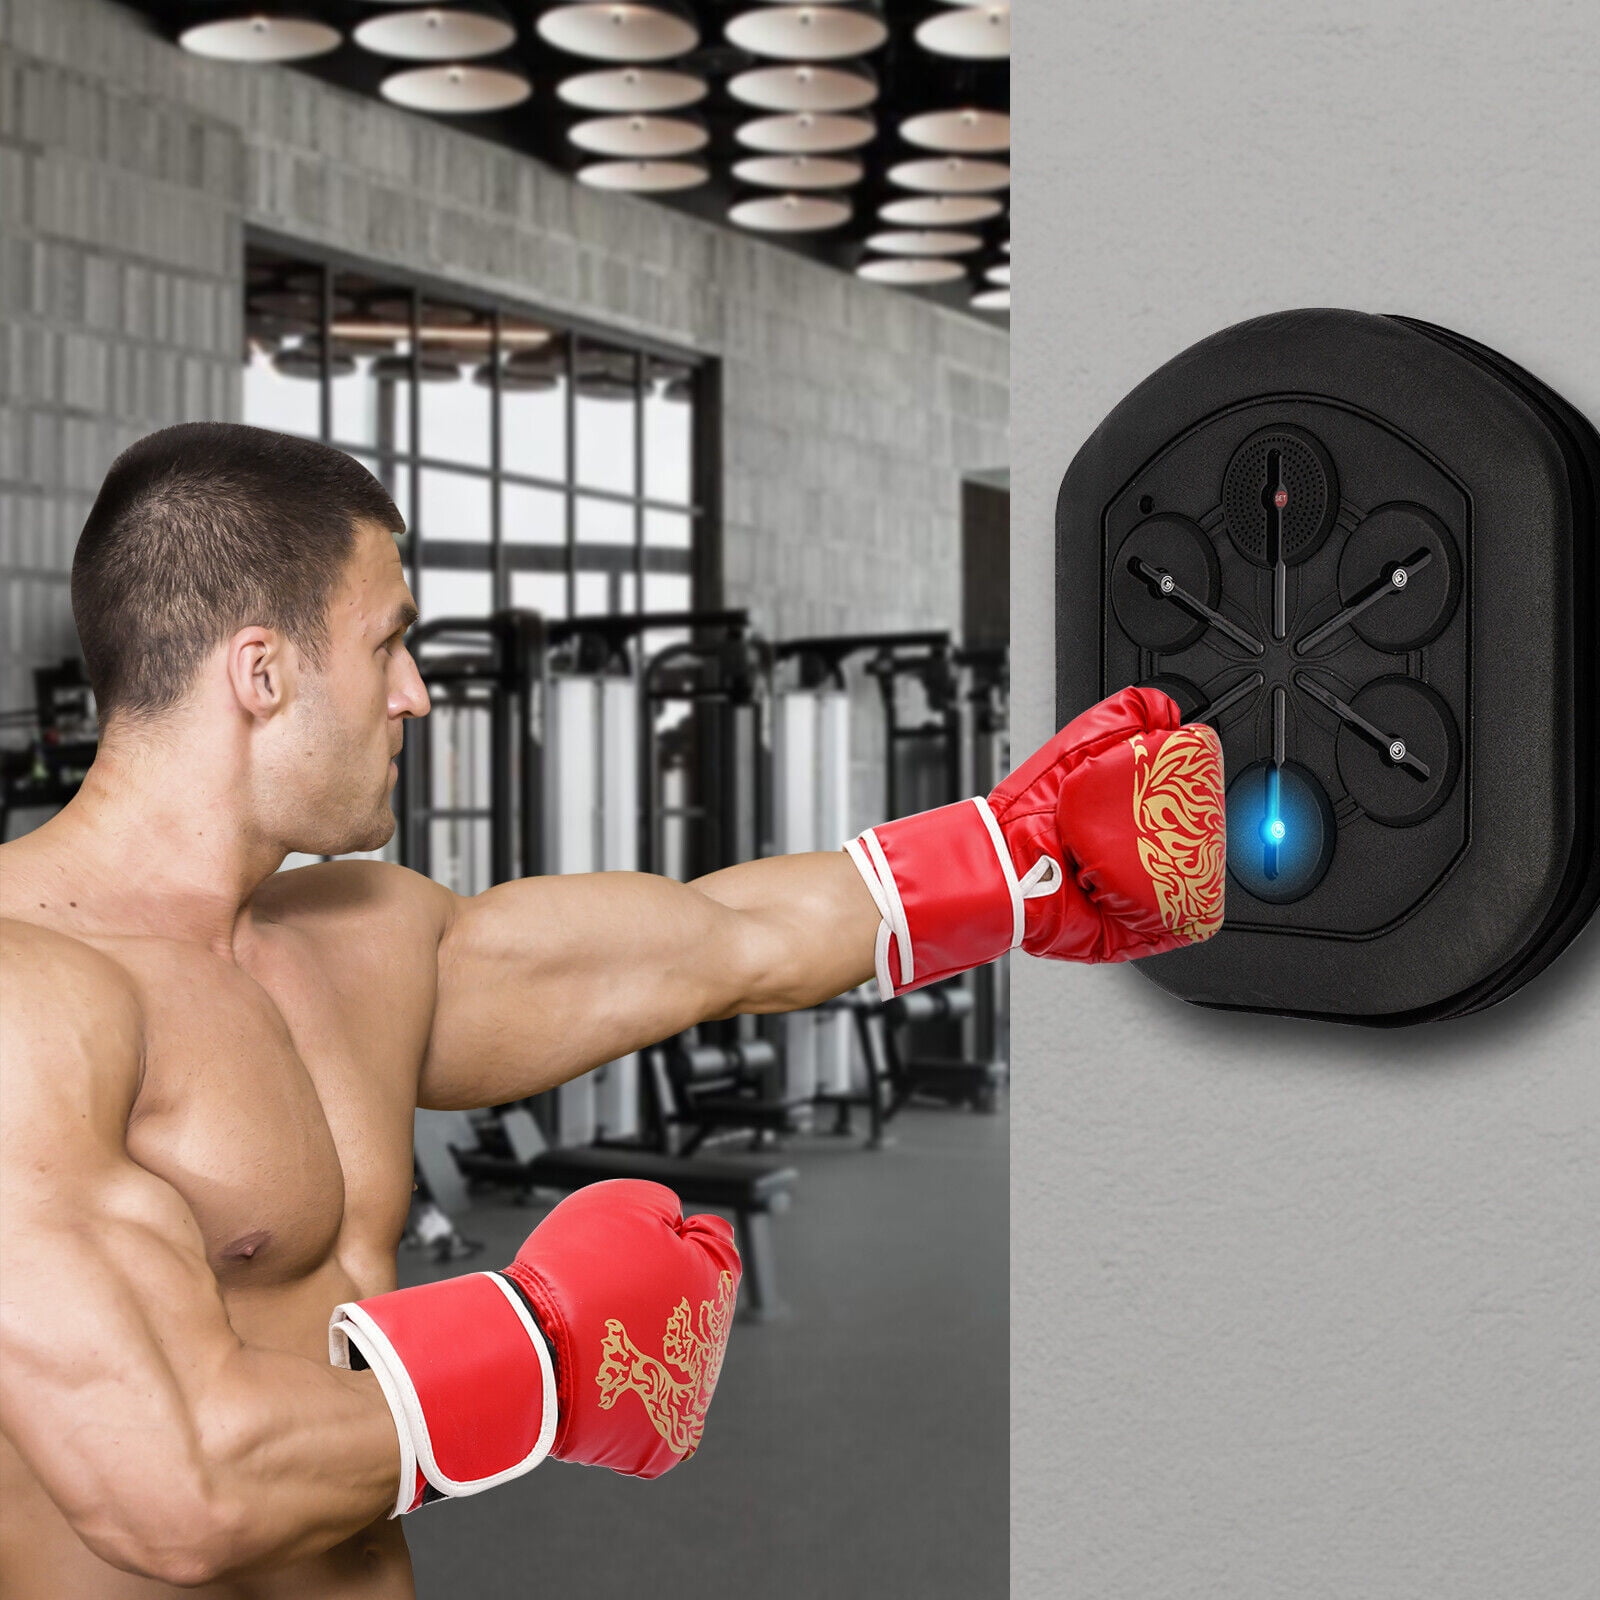 Music Boxing Machine Home Wall Mount Music Boxer, Electronic Smart Focus  Agility